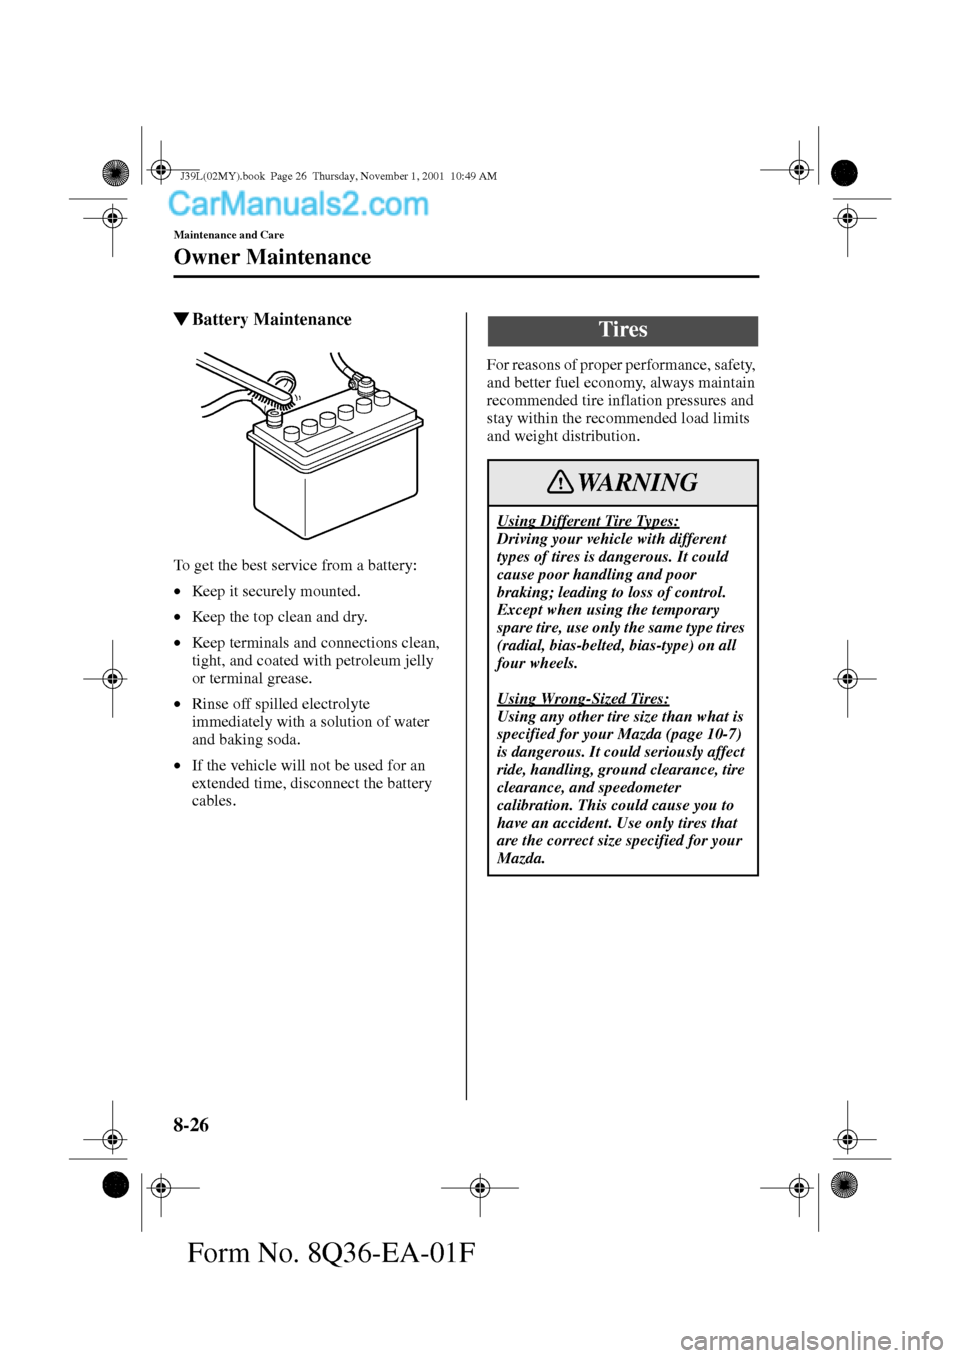 MAZDA MODEL PROTÉGÉ 2002  Owners Manual (in English) 8-26
Maintenance and Care
Owner Maintenance
Form No. 8Q36-EA-01F
Battery Maintenance
To get the best service from a battery:
•Keep it securely mounted.
•Keep the top clean and dry.
•Keep termin